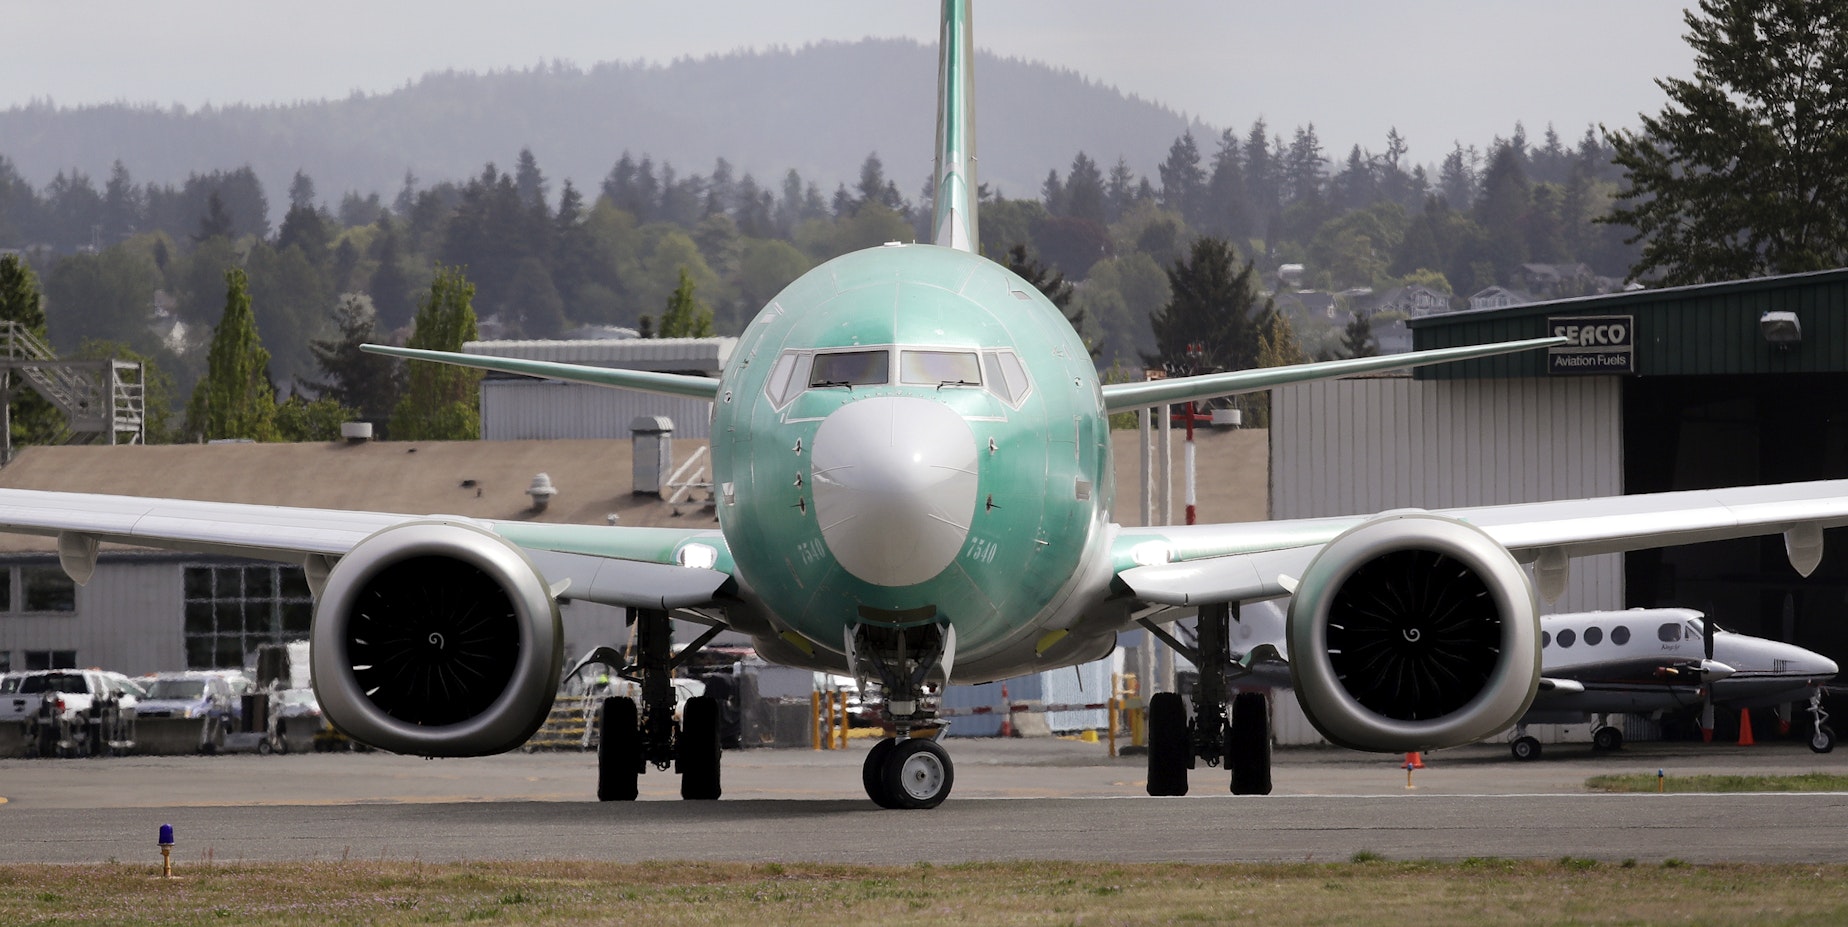 KUOW SPEEA engineer breaks silence on Boeing's MAX 737. Read this letter